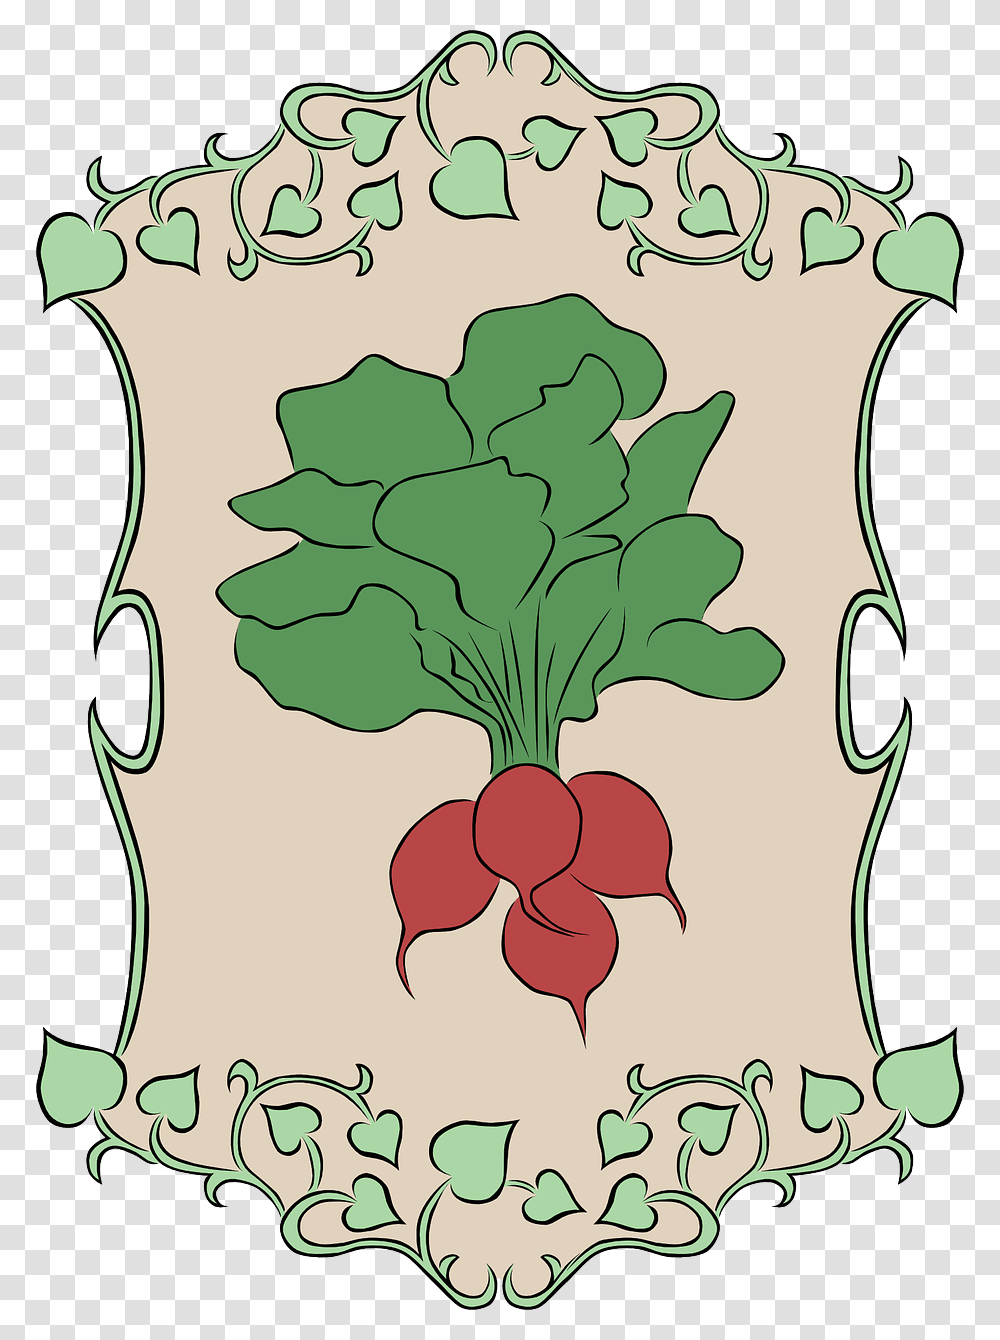 Radish Garden Vegetable Free Picture Poison Ivy Border Clipart, Plant, Food, Painting Transparent Png